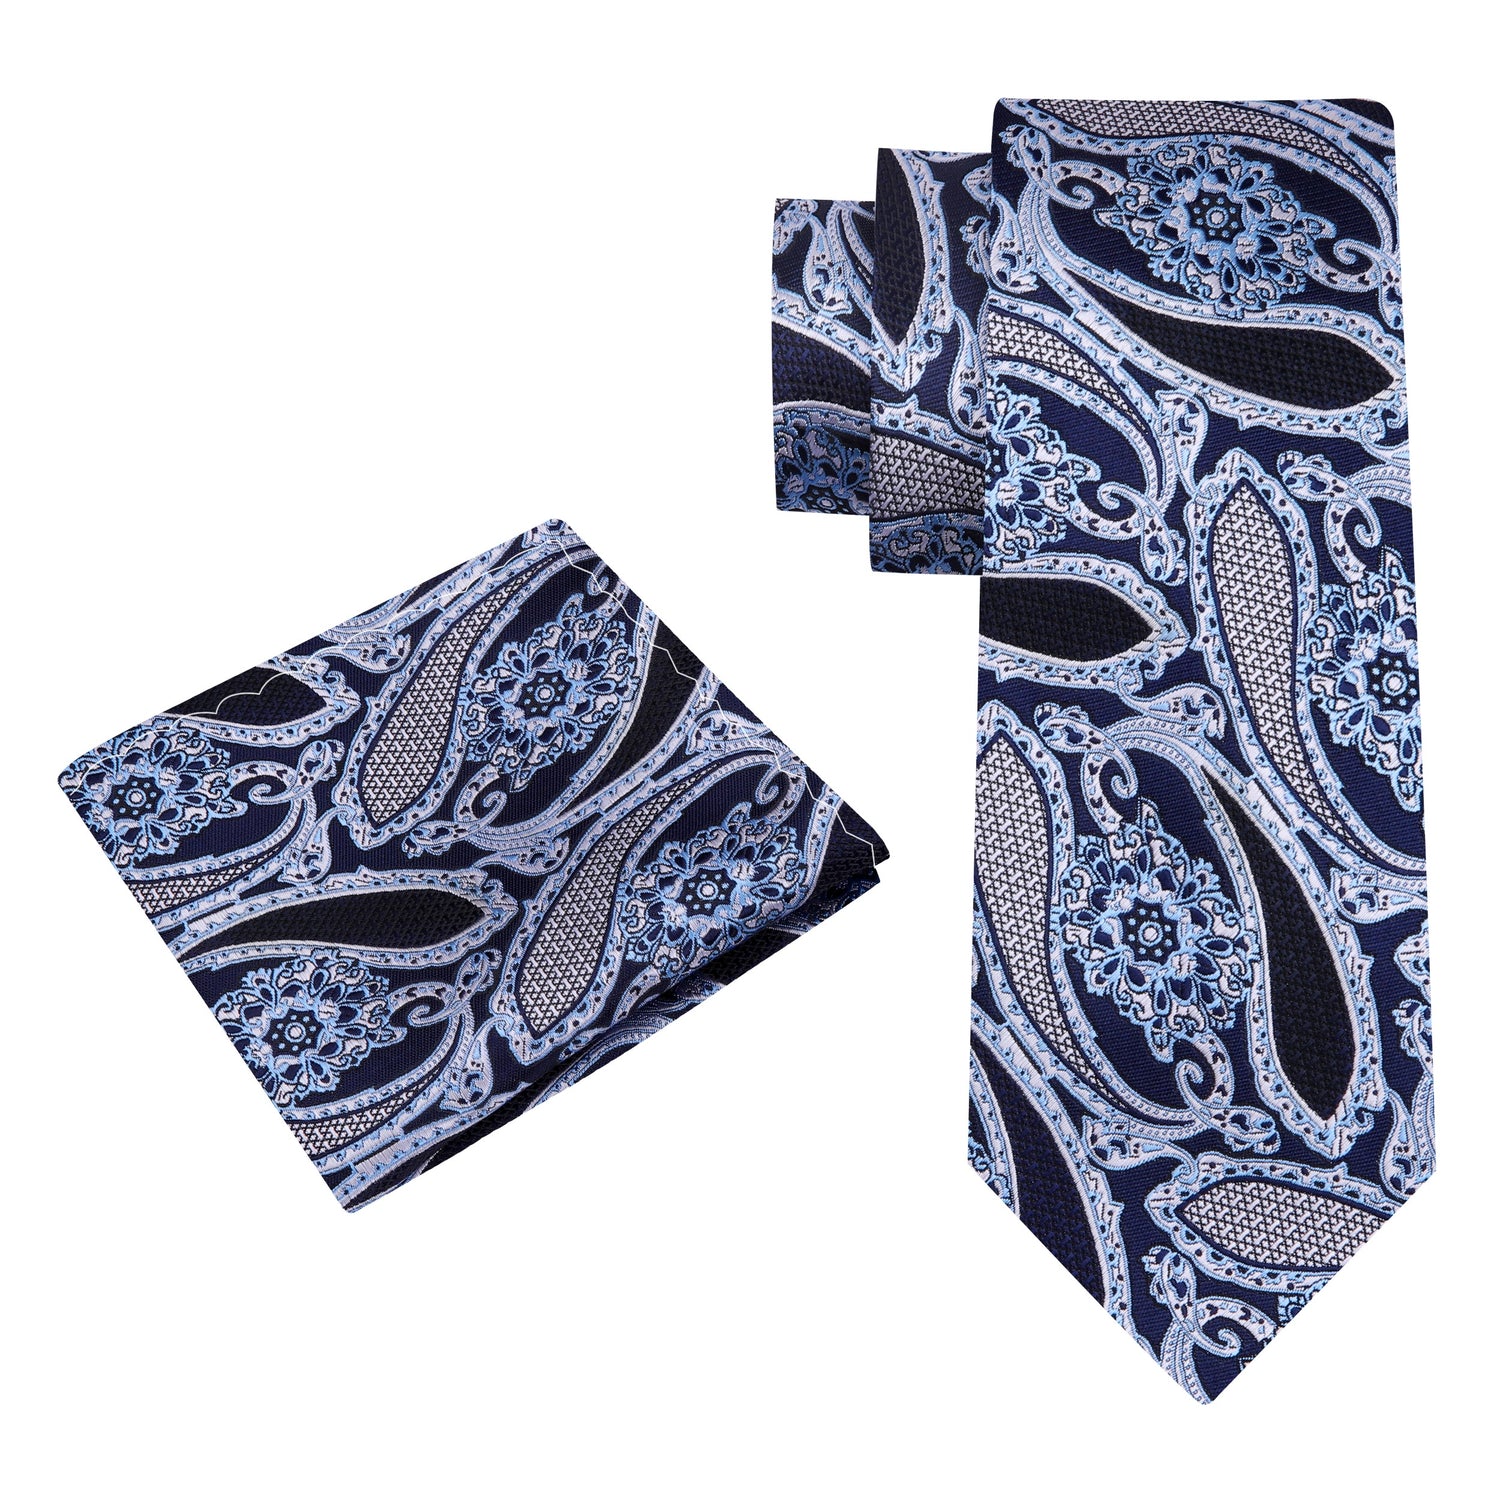 Alt View: A Black, Ice Blue, White Paisley Pattern Silk Necktie, With Matching Pocket Square 